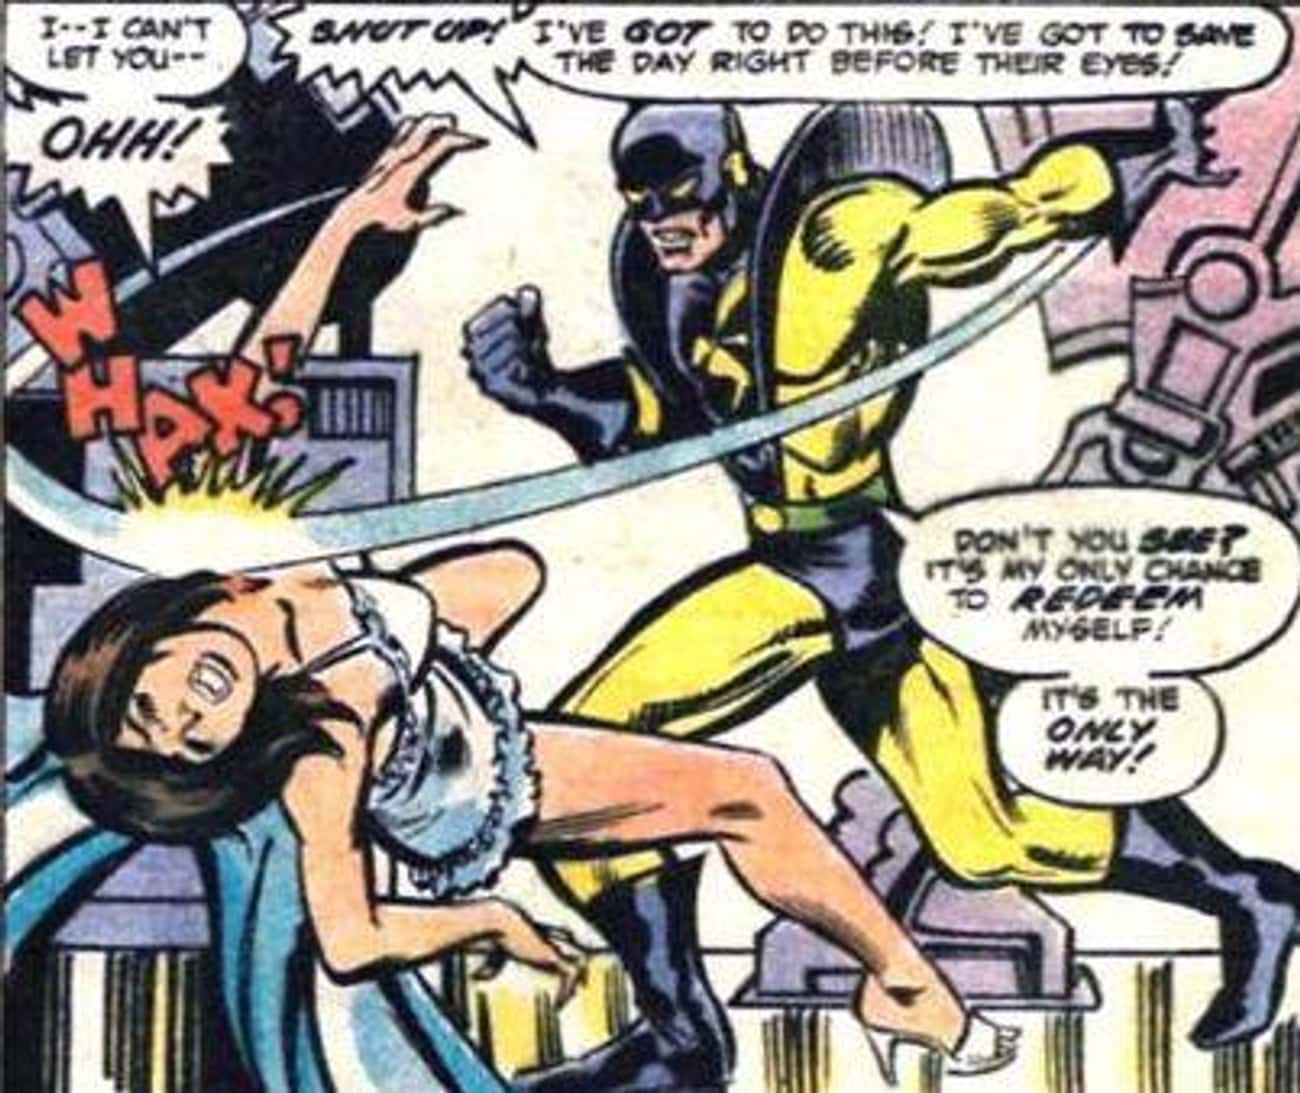 Her Relationship With Hank Pym Is Deeply Troubled